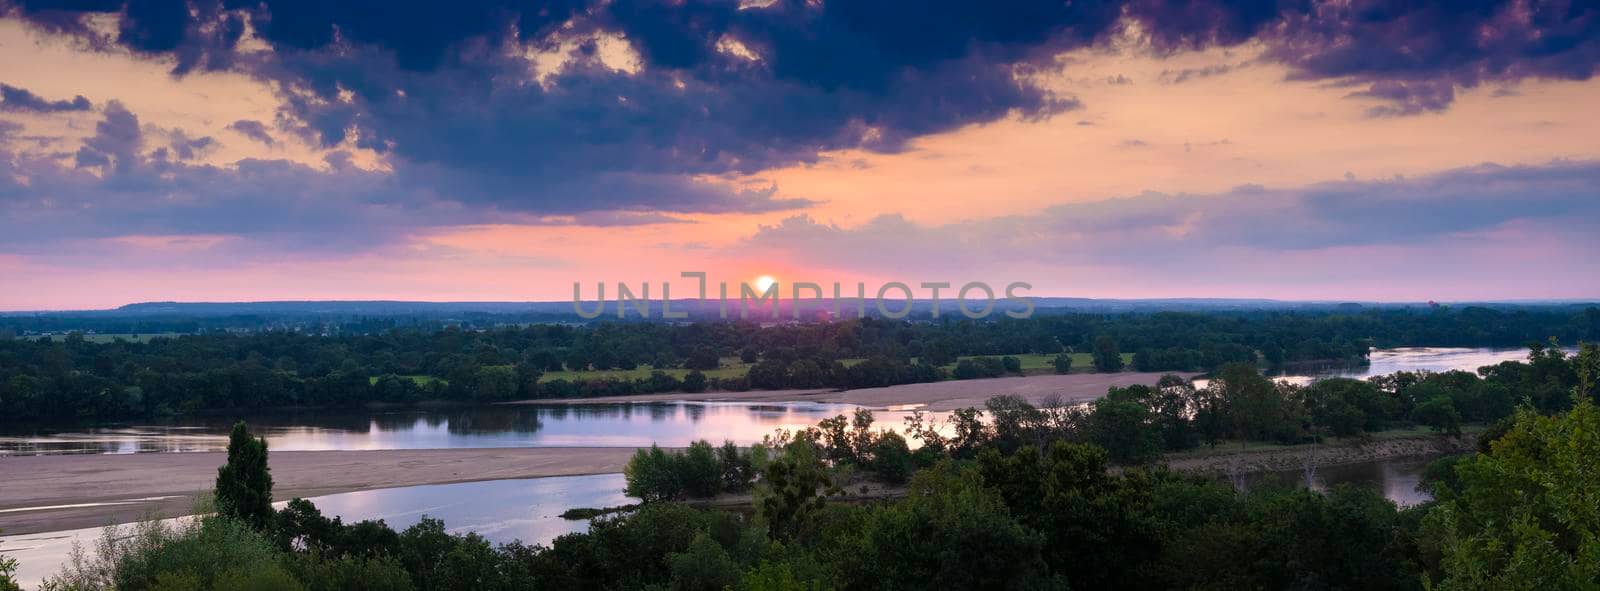 sunrise over river loire and landscape around it between tours and angers by ahavelaar